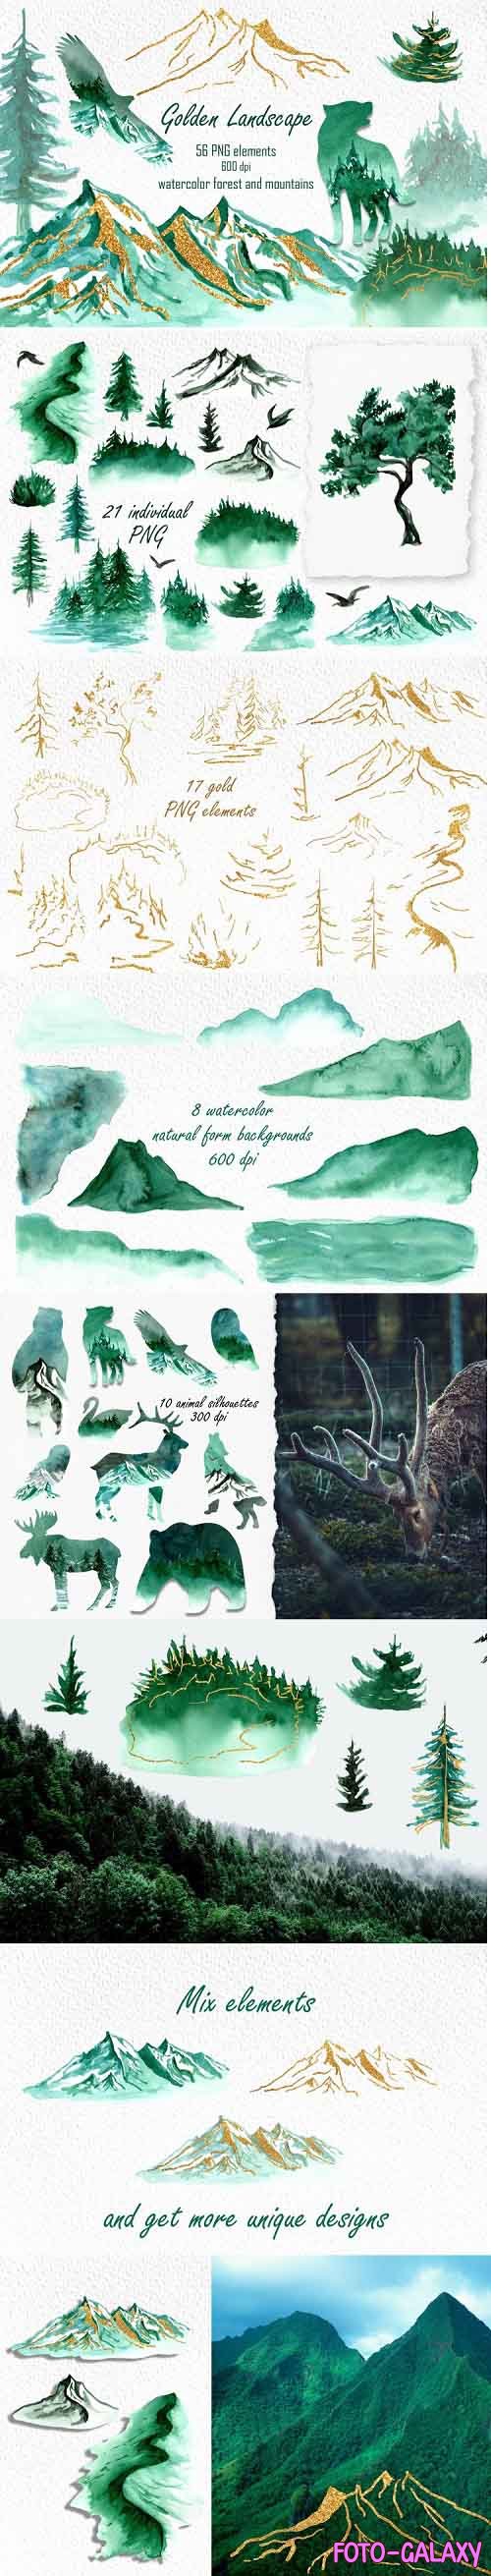 Watercolor landscape clipart, Forest animal silhouettes PNG - 1176802